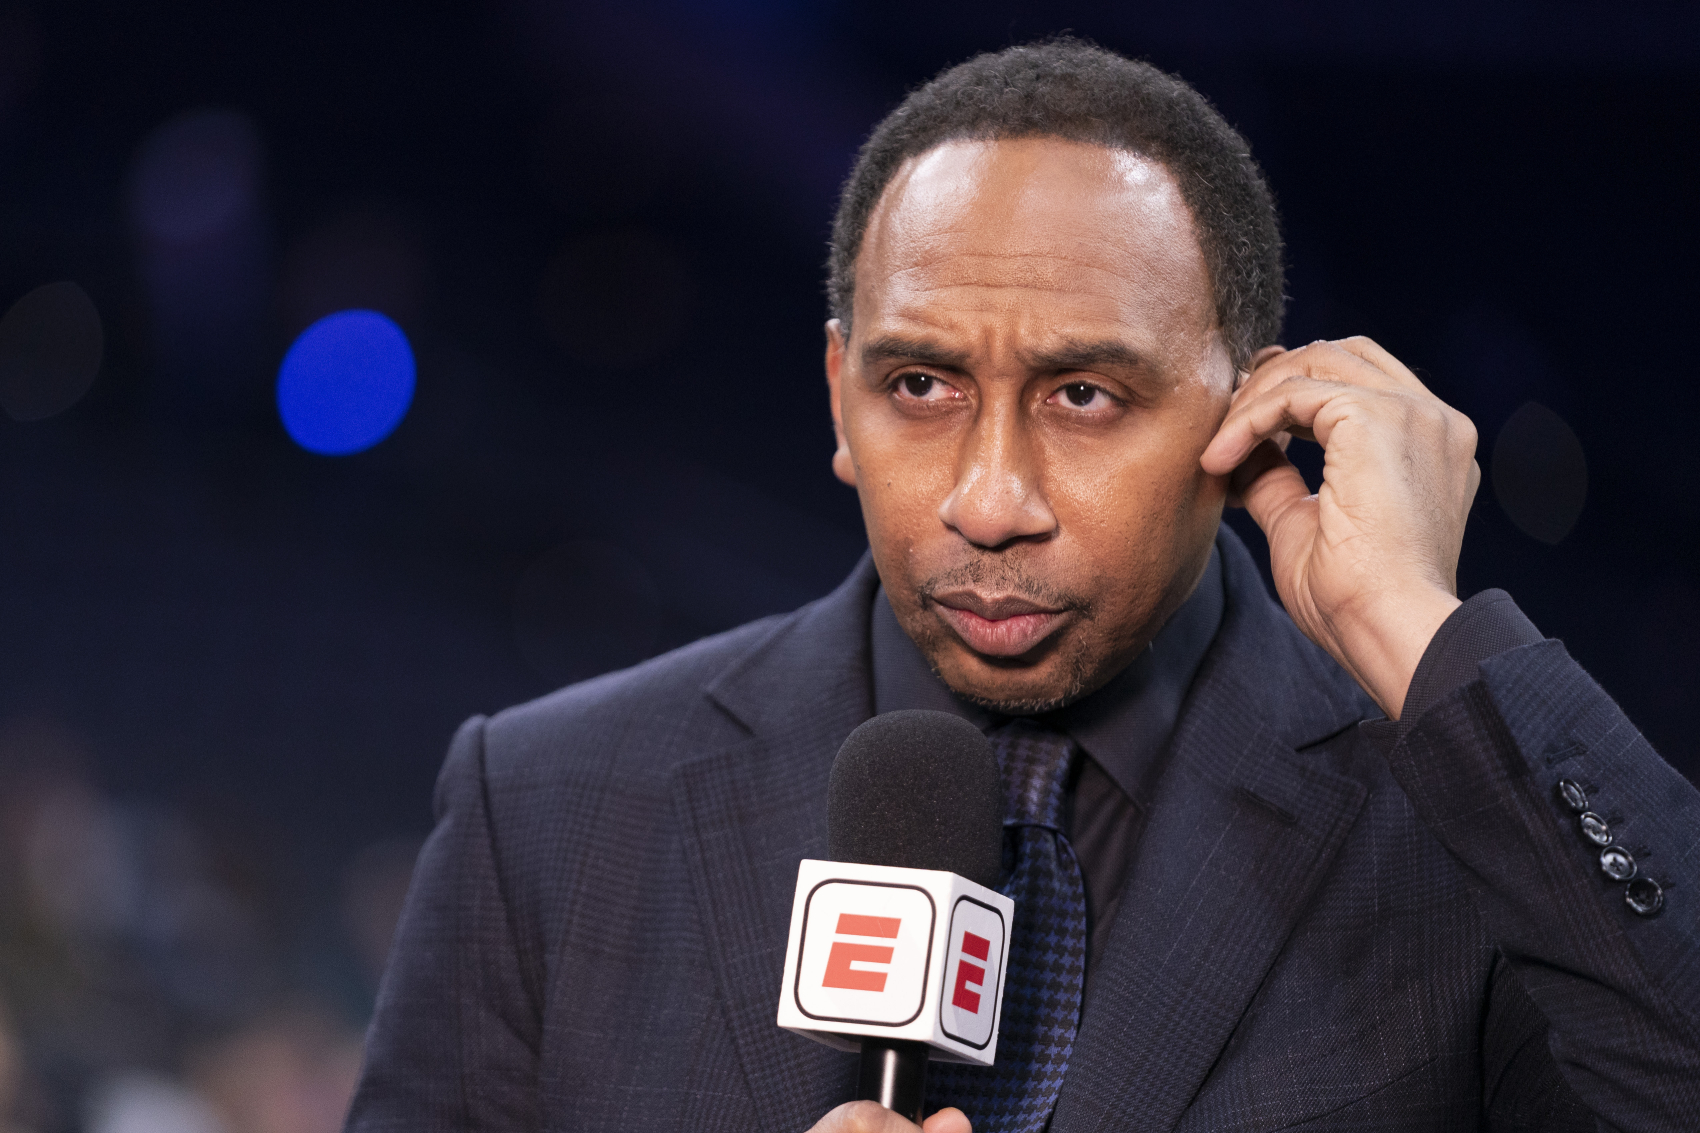 ESPN's Stephen A. Smith just got exactly what he wished for months ago, but he ultimately got it in the worst possible way.